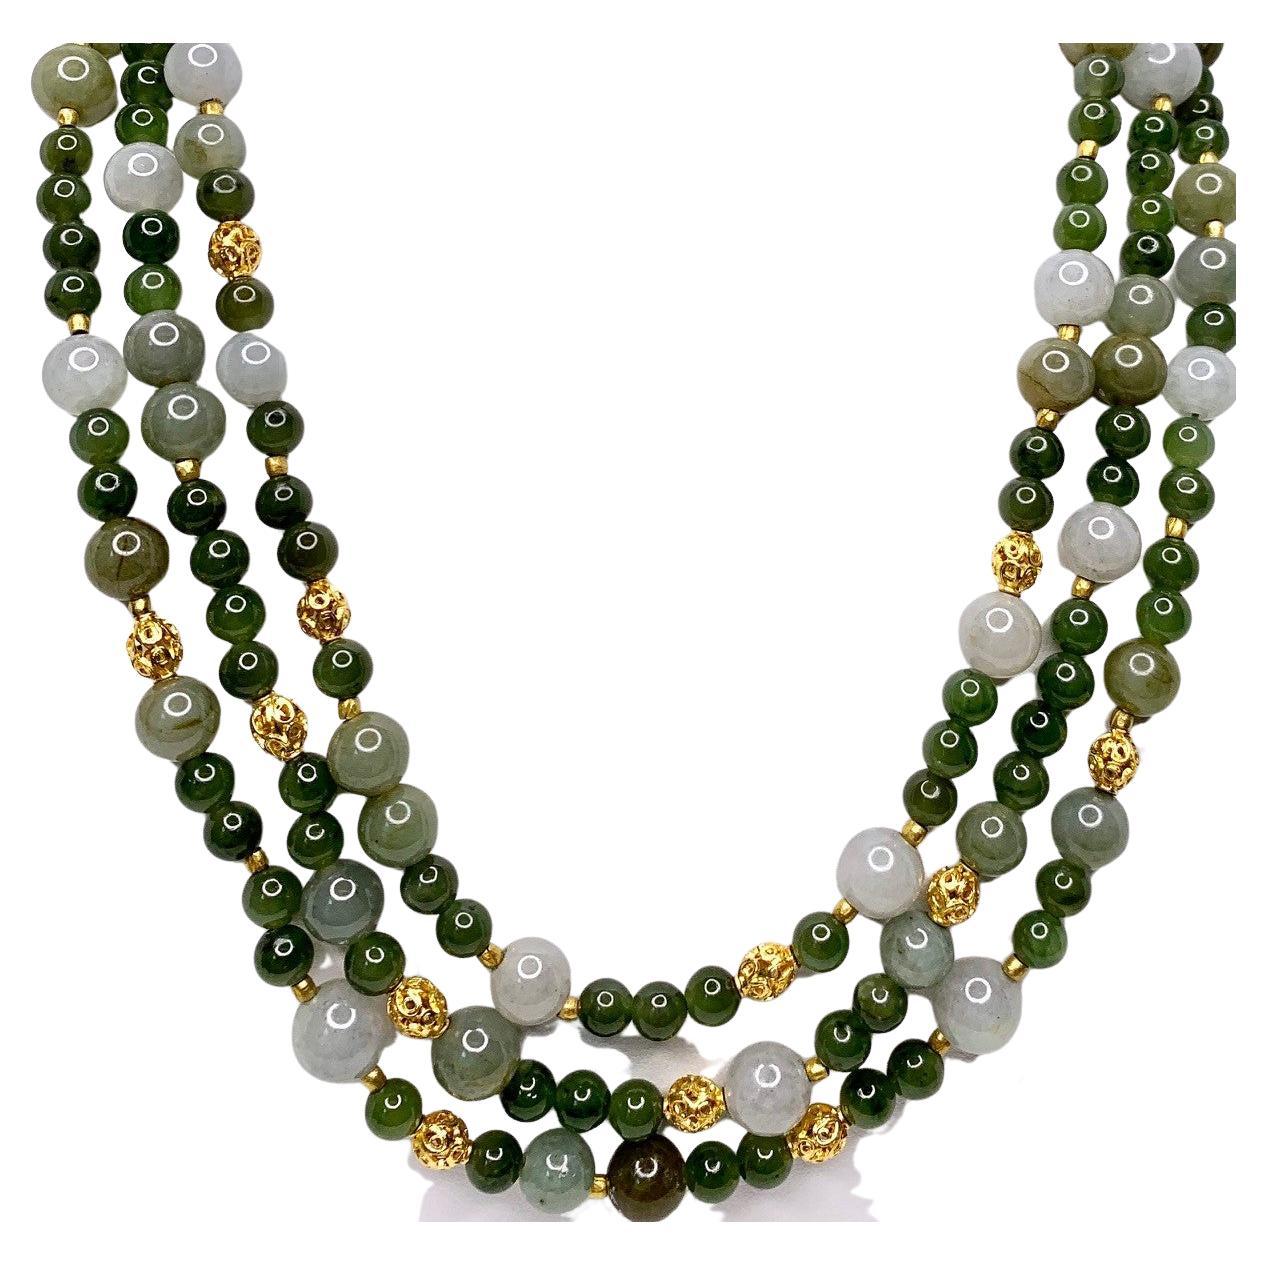 3-Strand Multi-Colored Jade Beaded Necklace with 18k and 22k Yellow Gold Accents For Sale